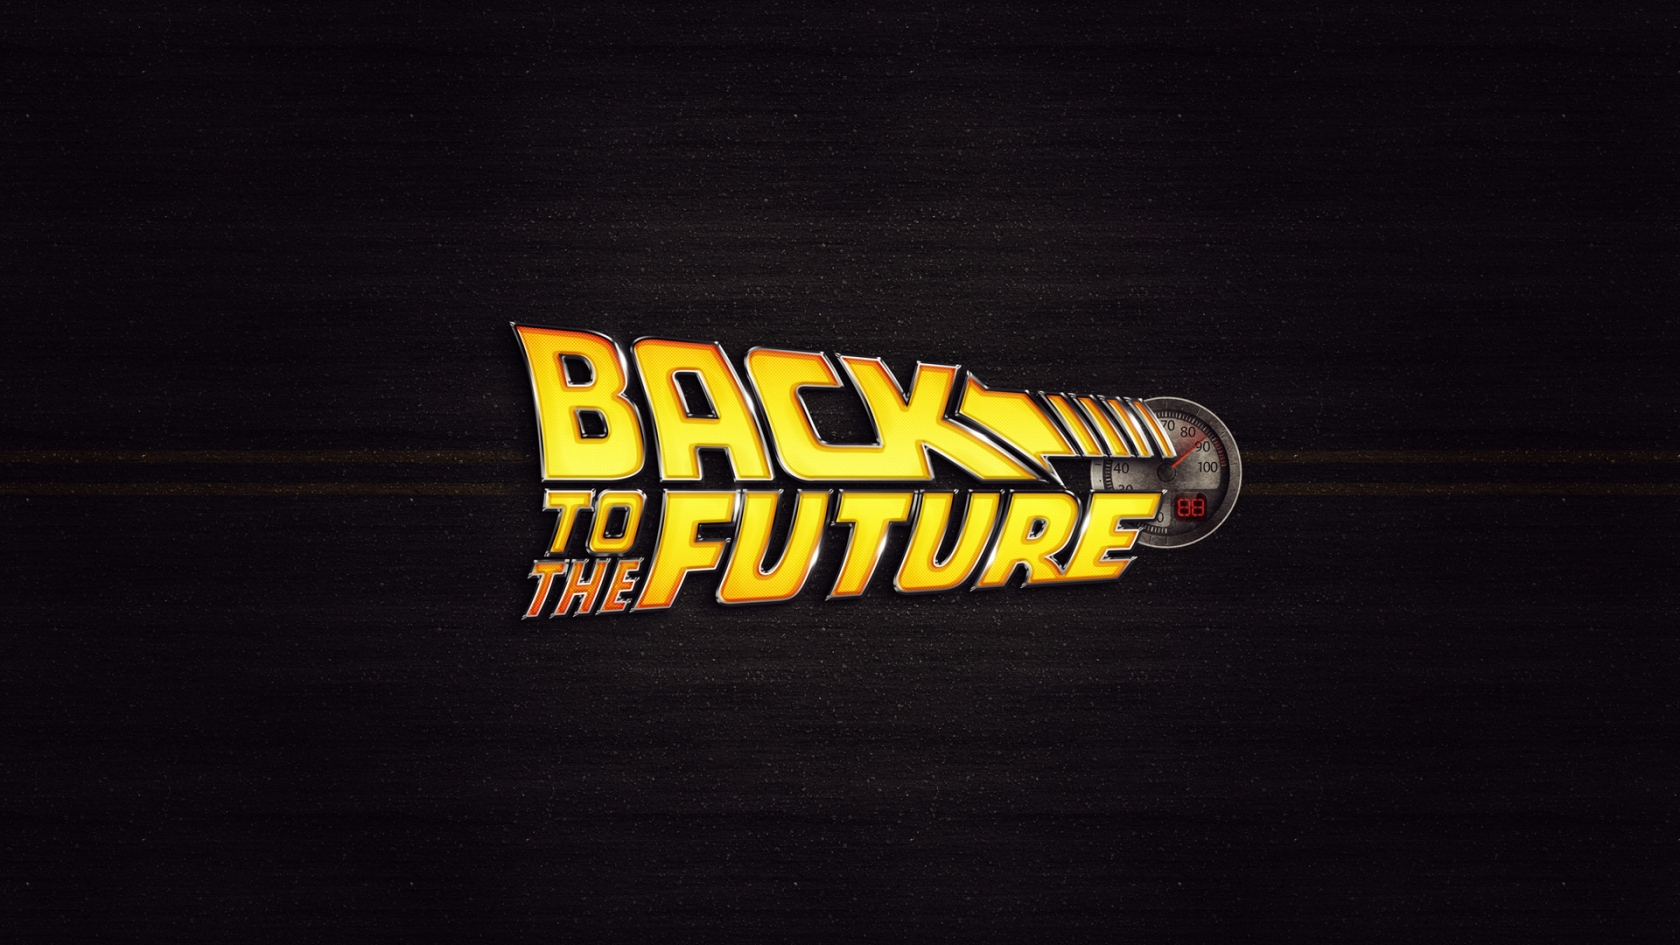 Back to the Future for 1680 x 945 HDTV resolution